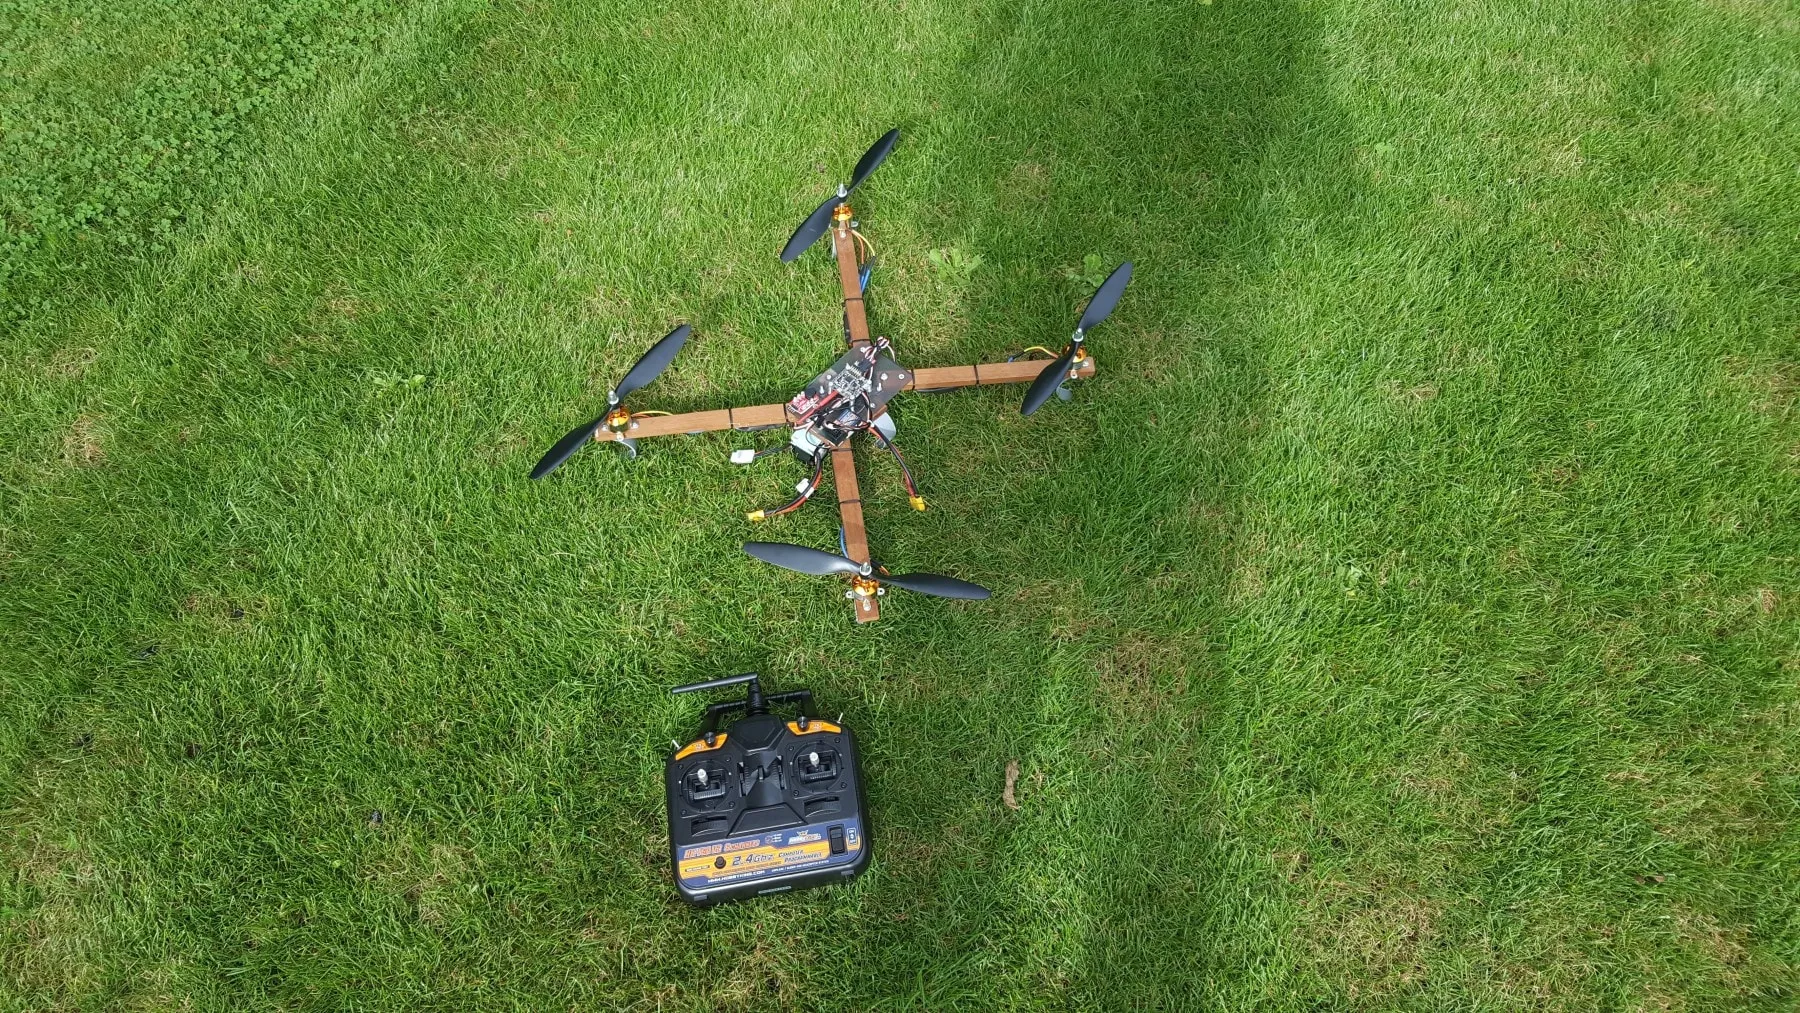 Testing the finished quadcopter outside